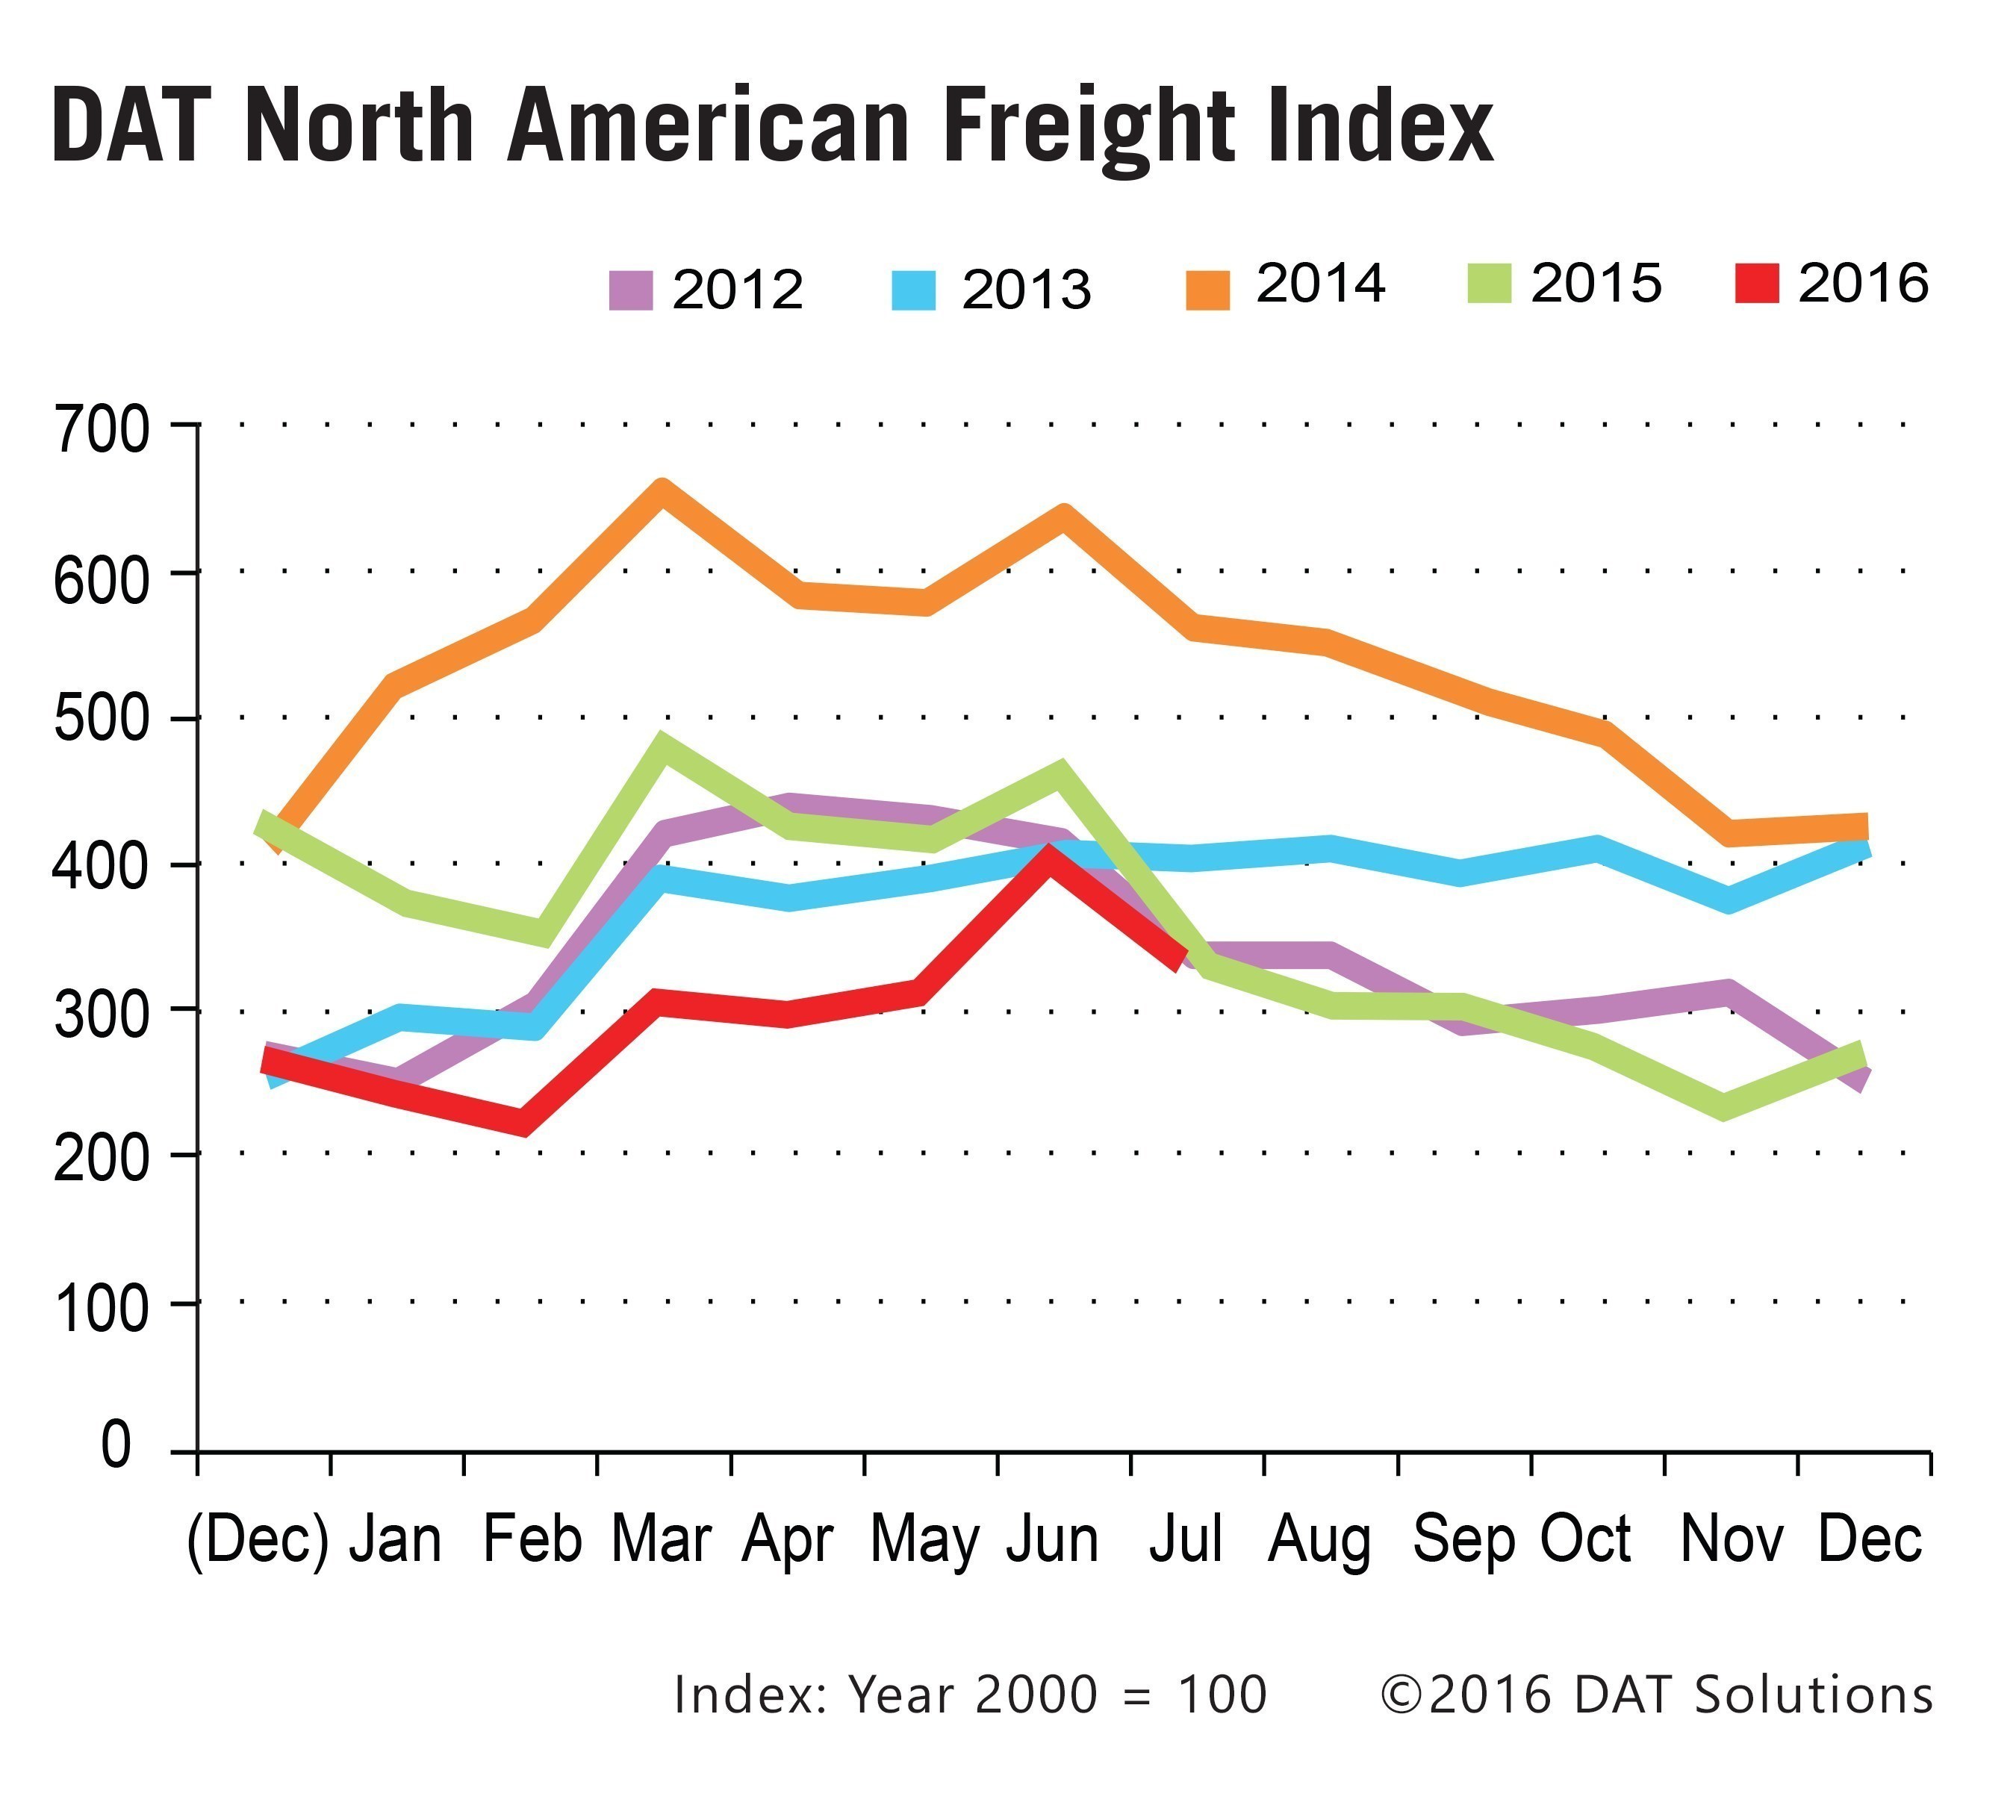 July spot market freight availability caught up with 2015 levels for the first time this year, due to an increase in volume for dry and refrigerated ("reefer") van trailers, and despite a year-over-year flatbed freight volume decline.